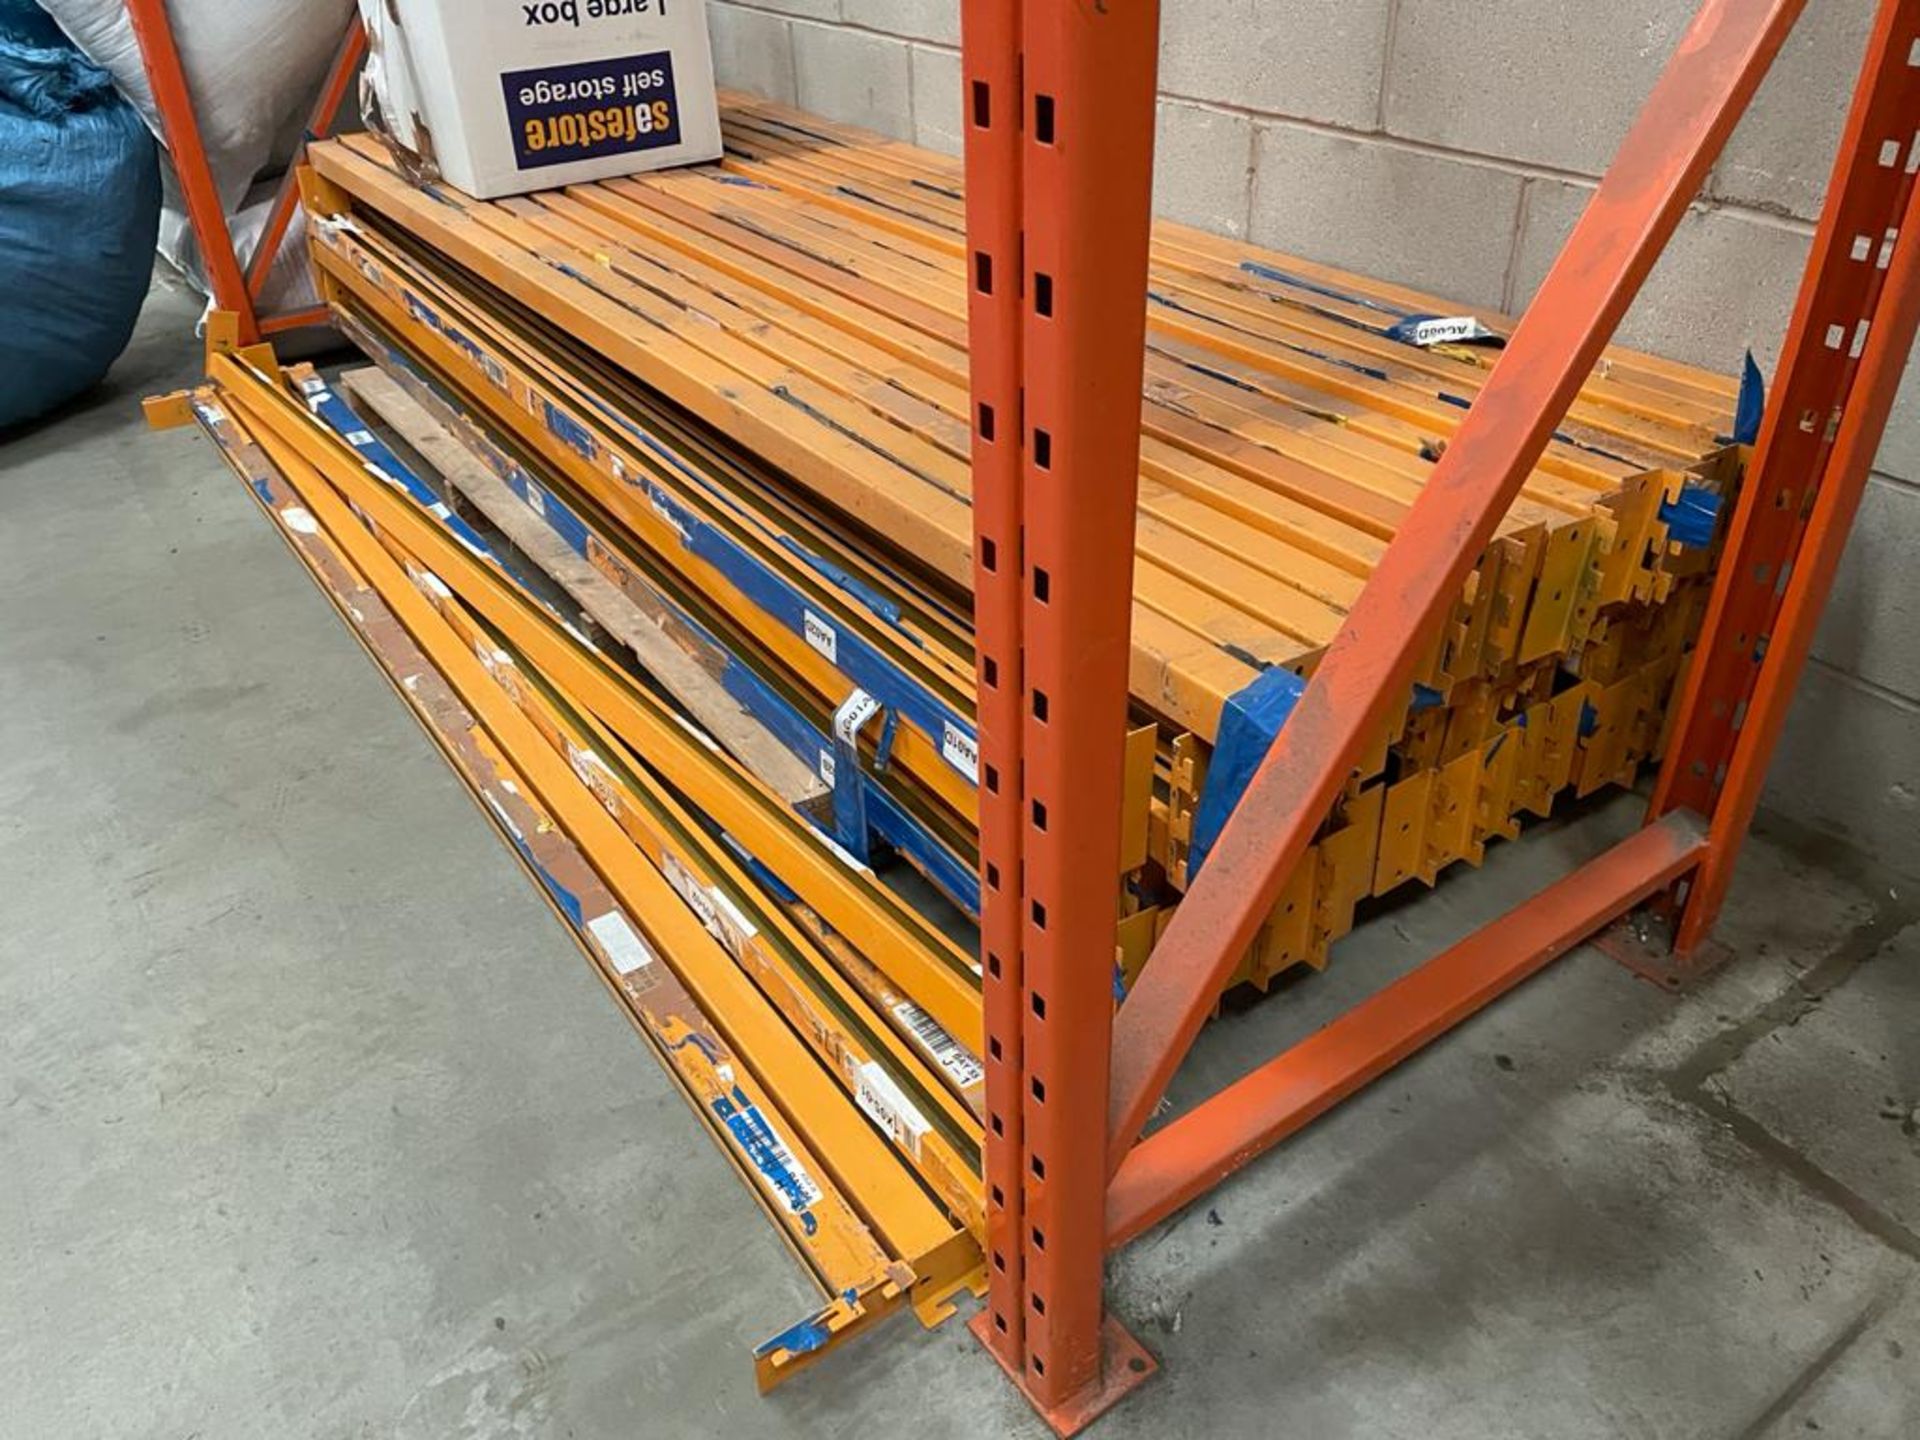 68 x Pallet Racking Crossbeams - 260cm - CL646 - Location: Belle View, Manchester.Collection: This - Image 2 of 5